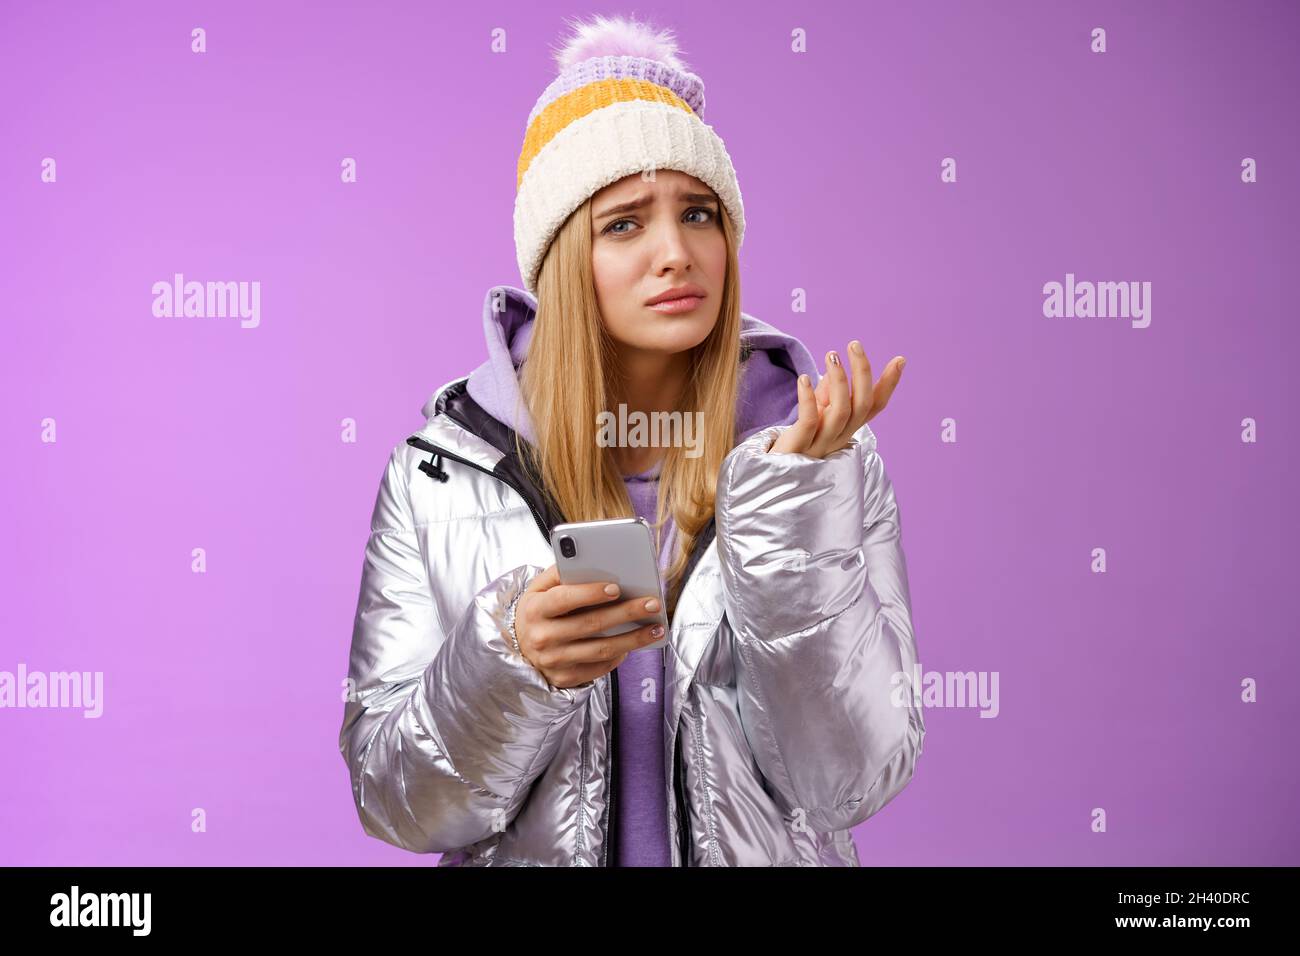 Questioned complicated cute blond girlfriend receive strange message look perplexed confused raising hand shrugging lift eyebrow Stock Photo